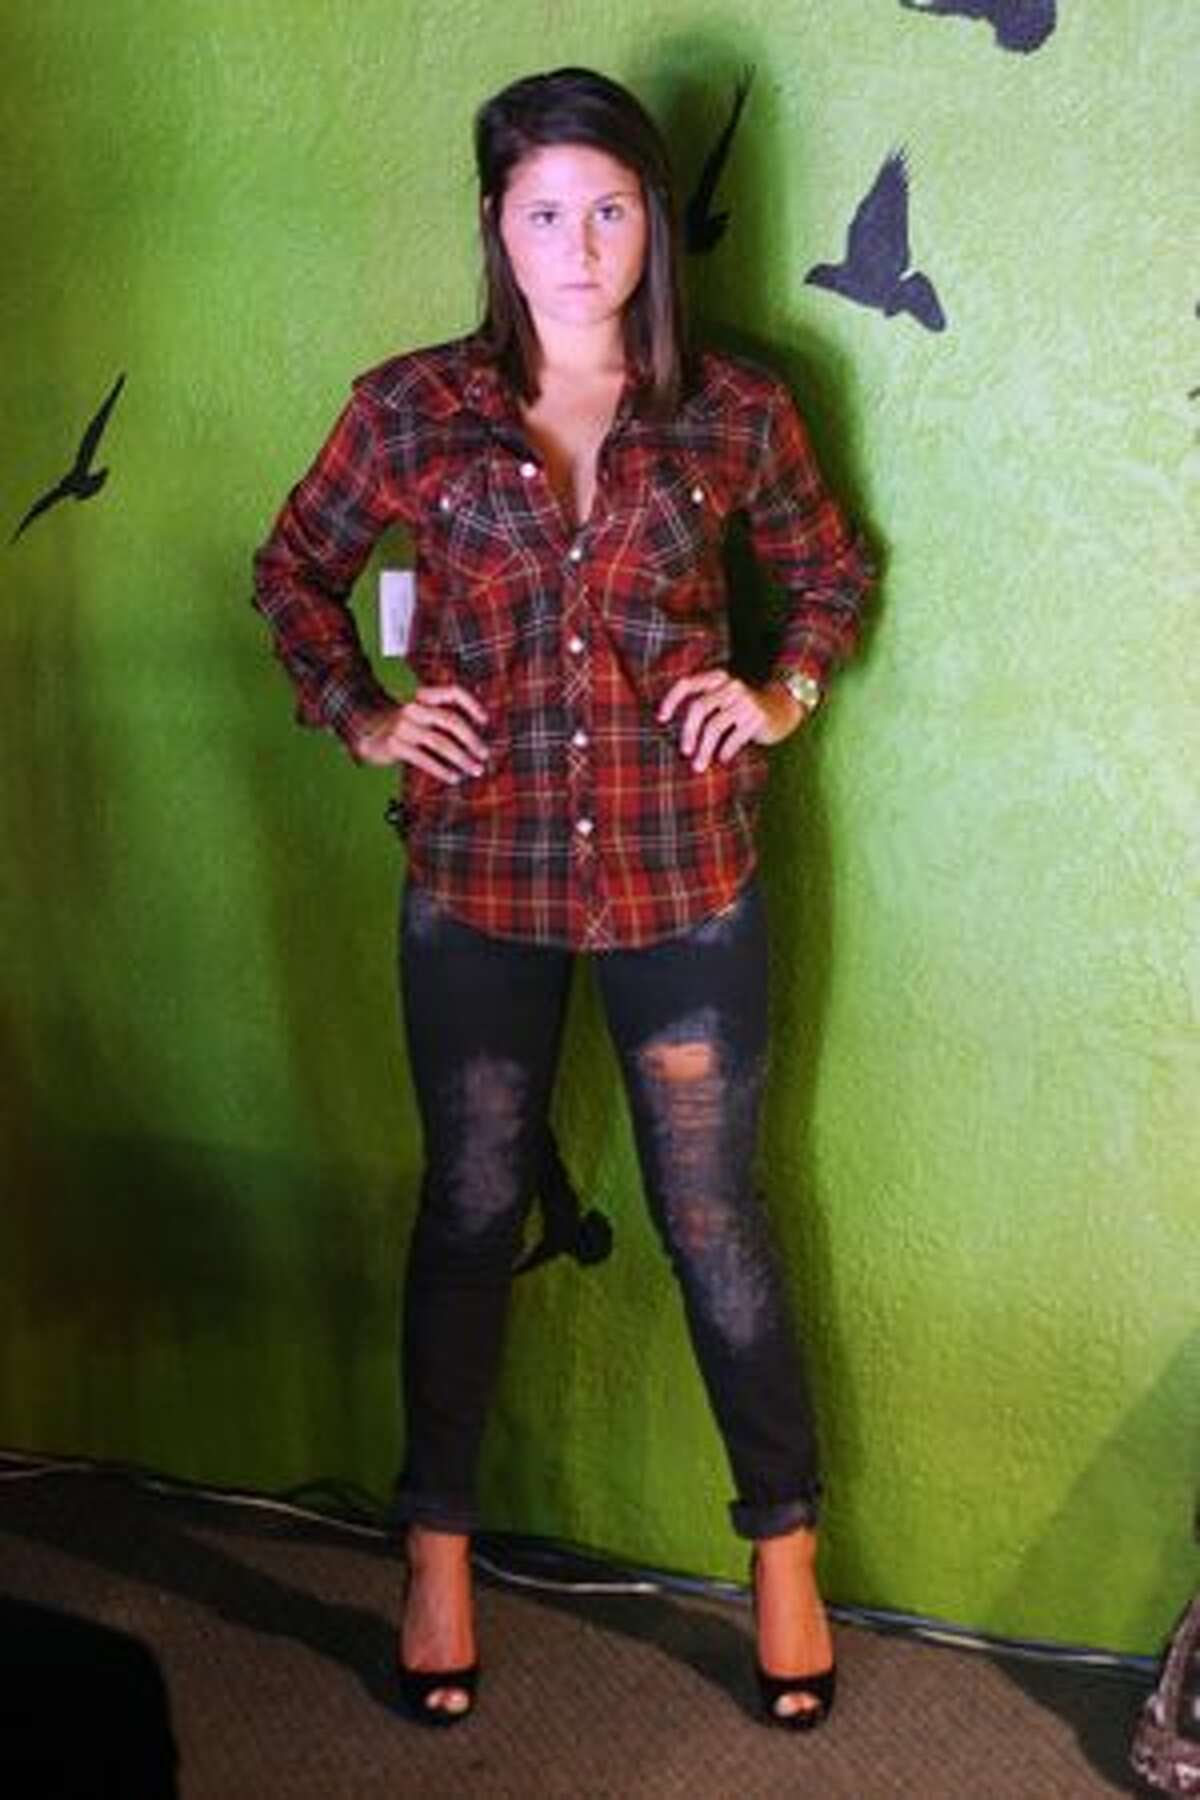 Alexus Sheft, sister of the owner Brittany Shefts, models a modern farmgirl look.